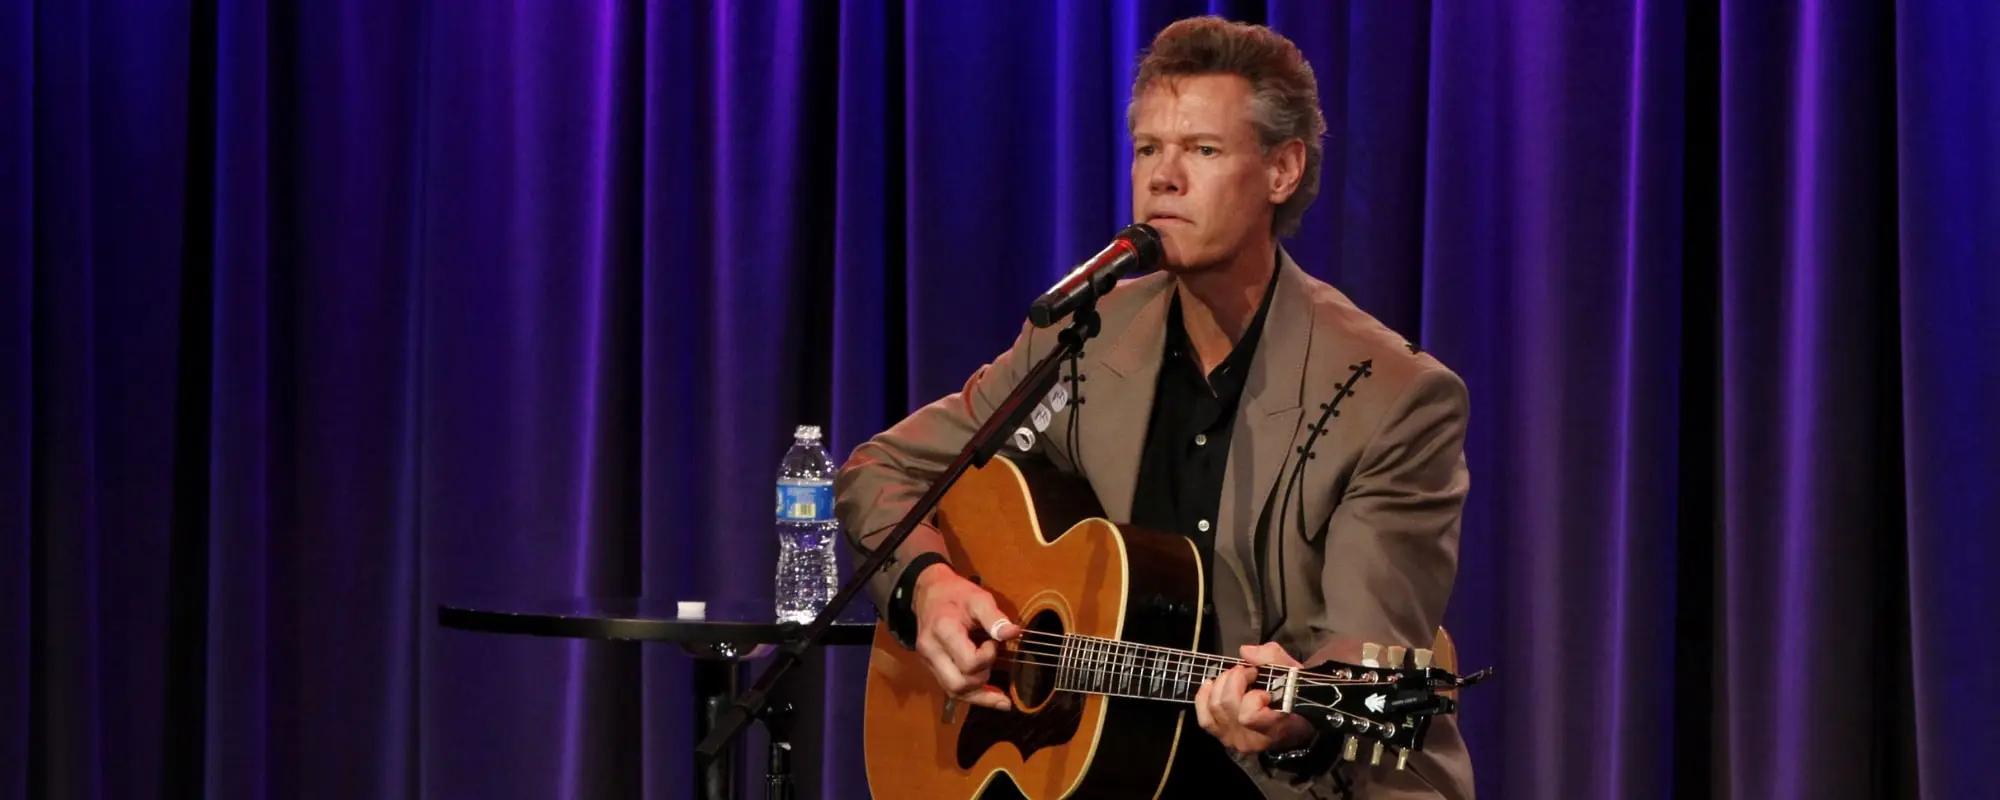 3 Timeless Randy Travis Songs Every Country Music Fan Should Know by Heart [Video]